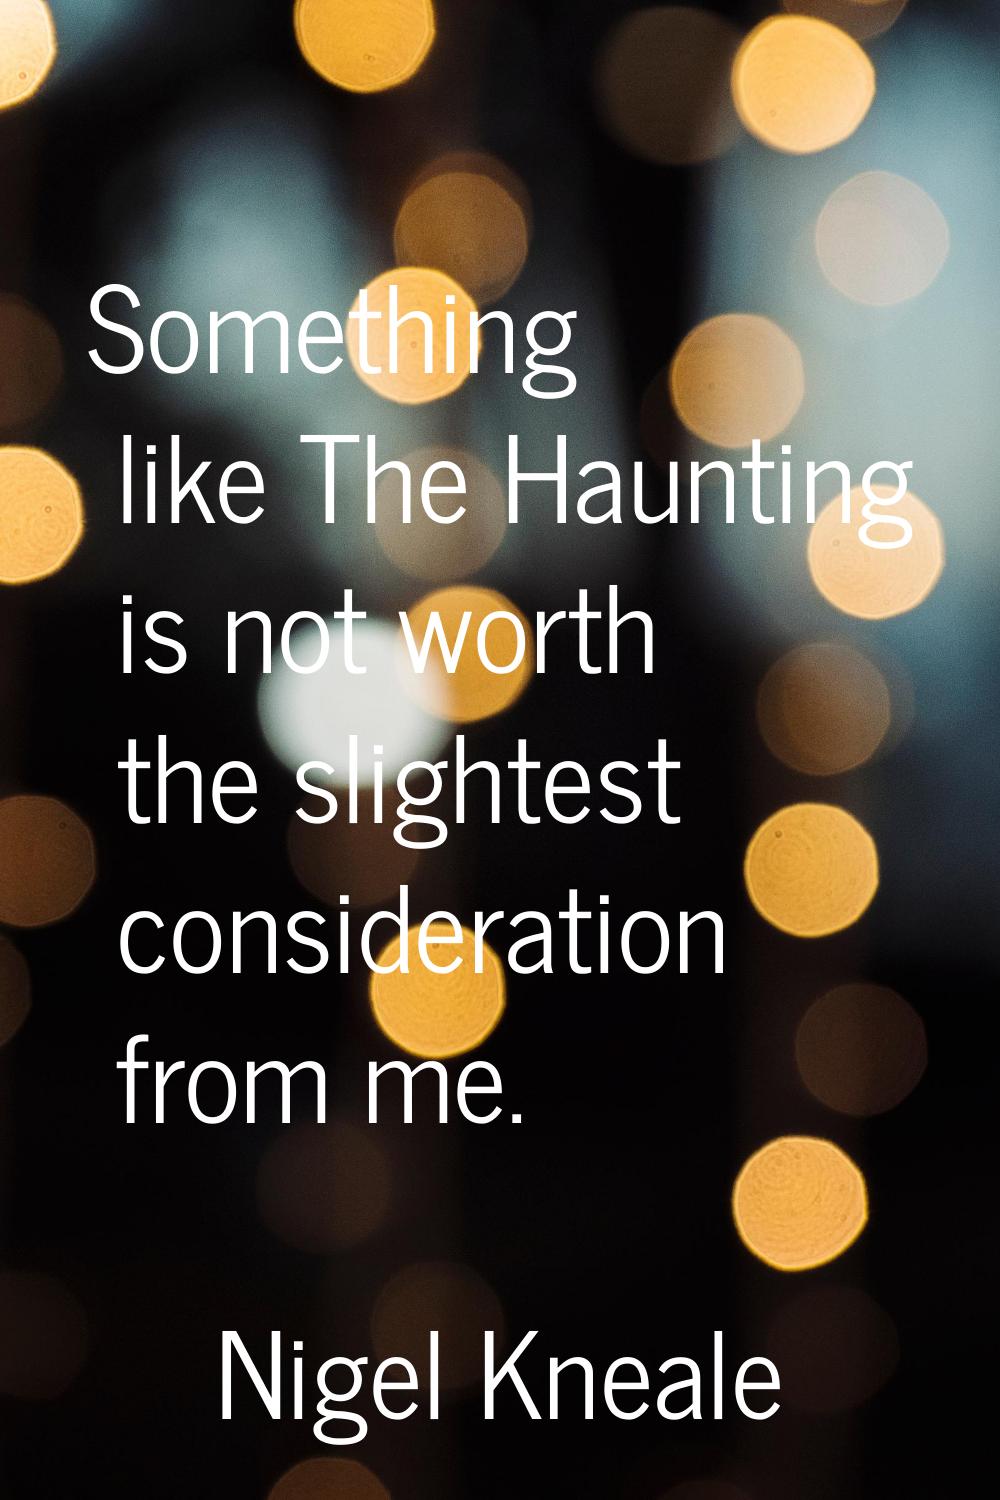 Something like The Haunting is not worth the slightest consideration from me.